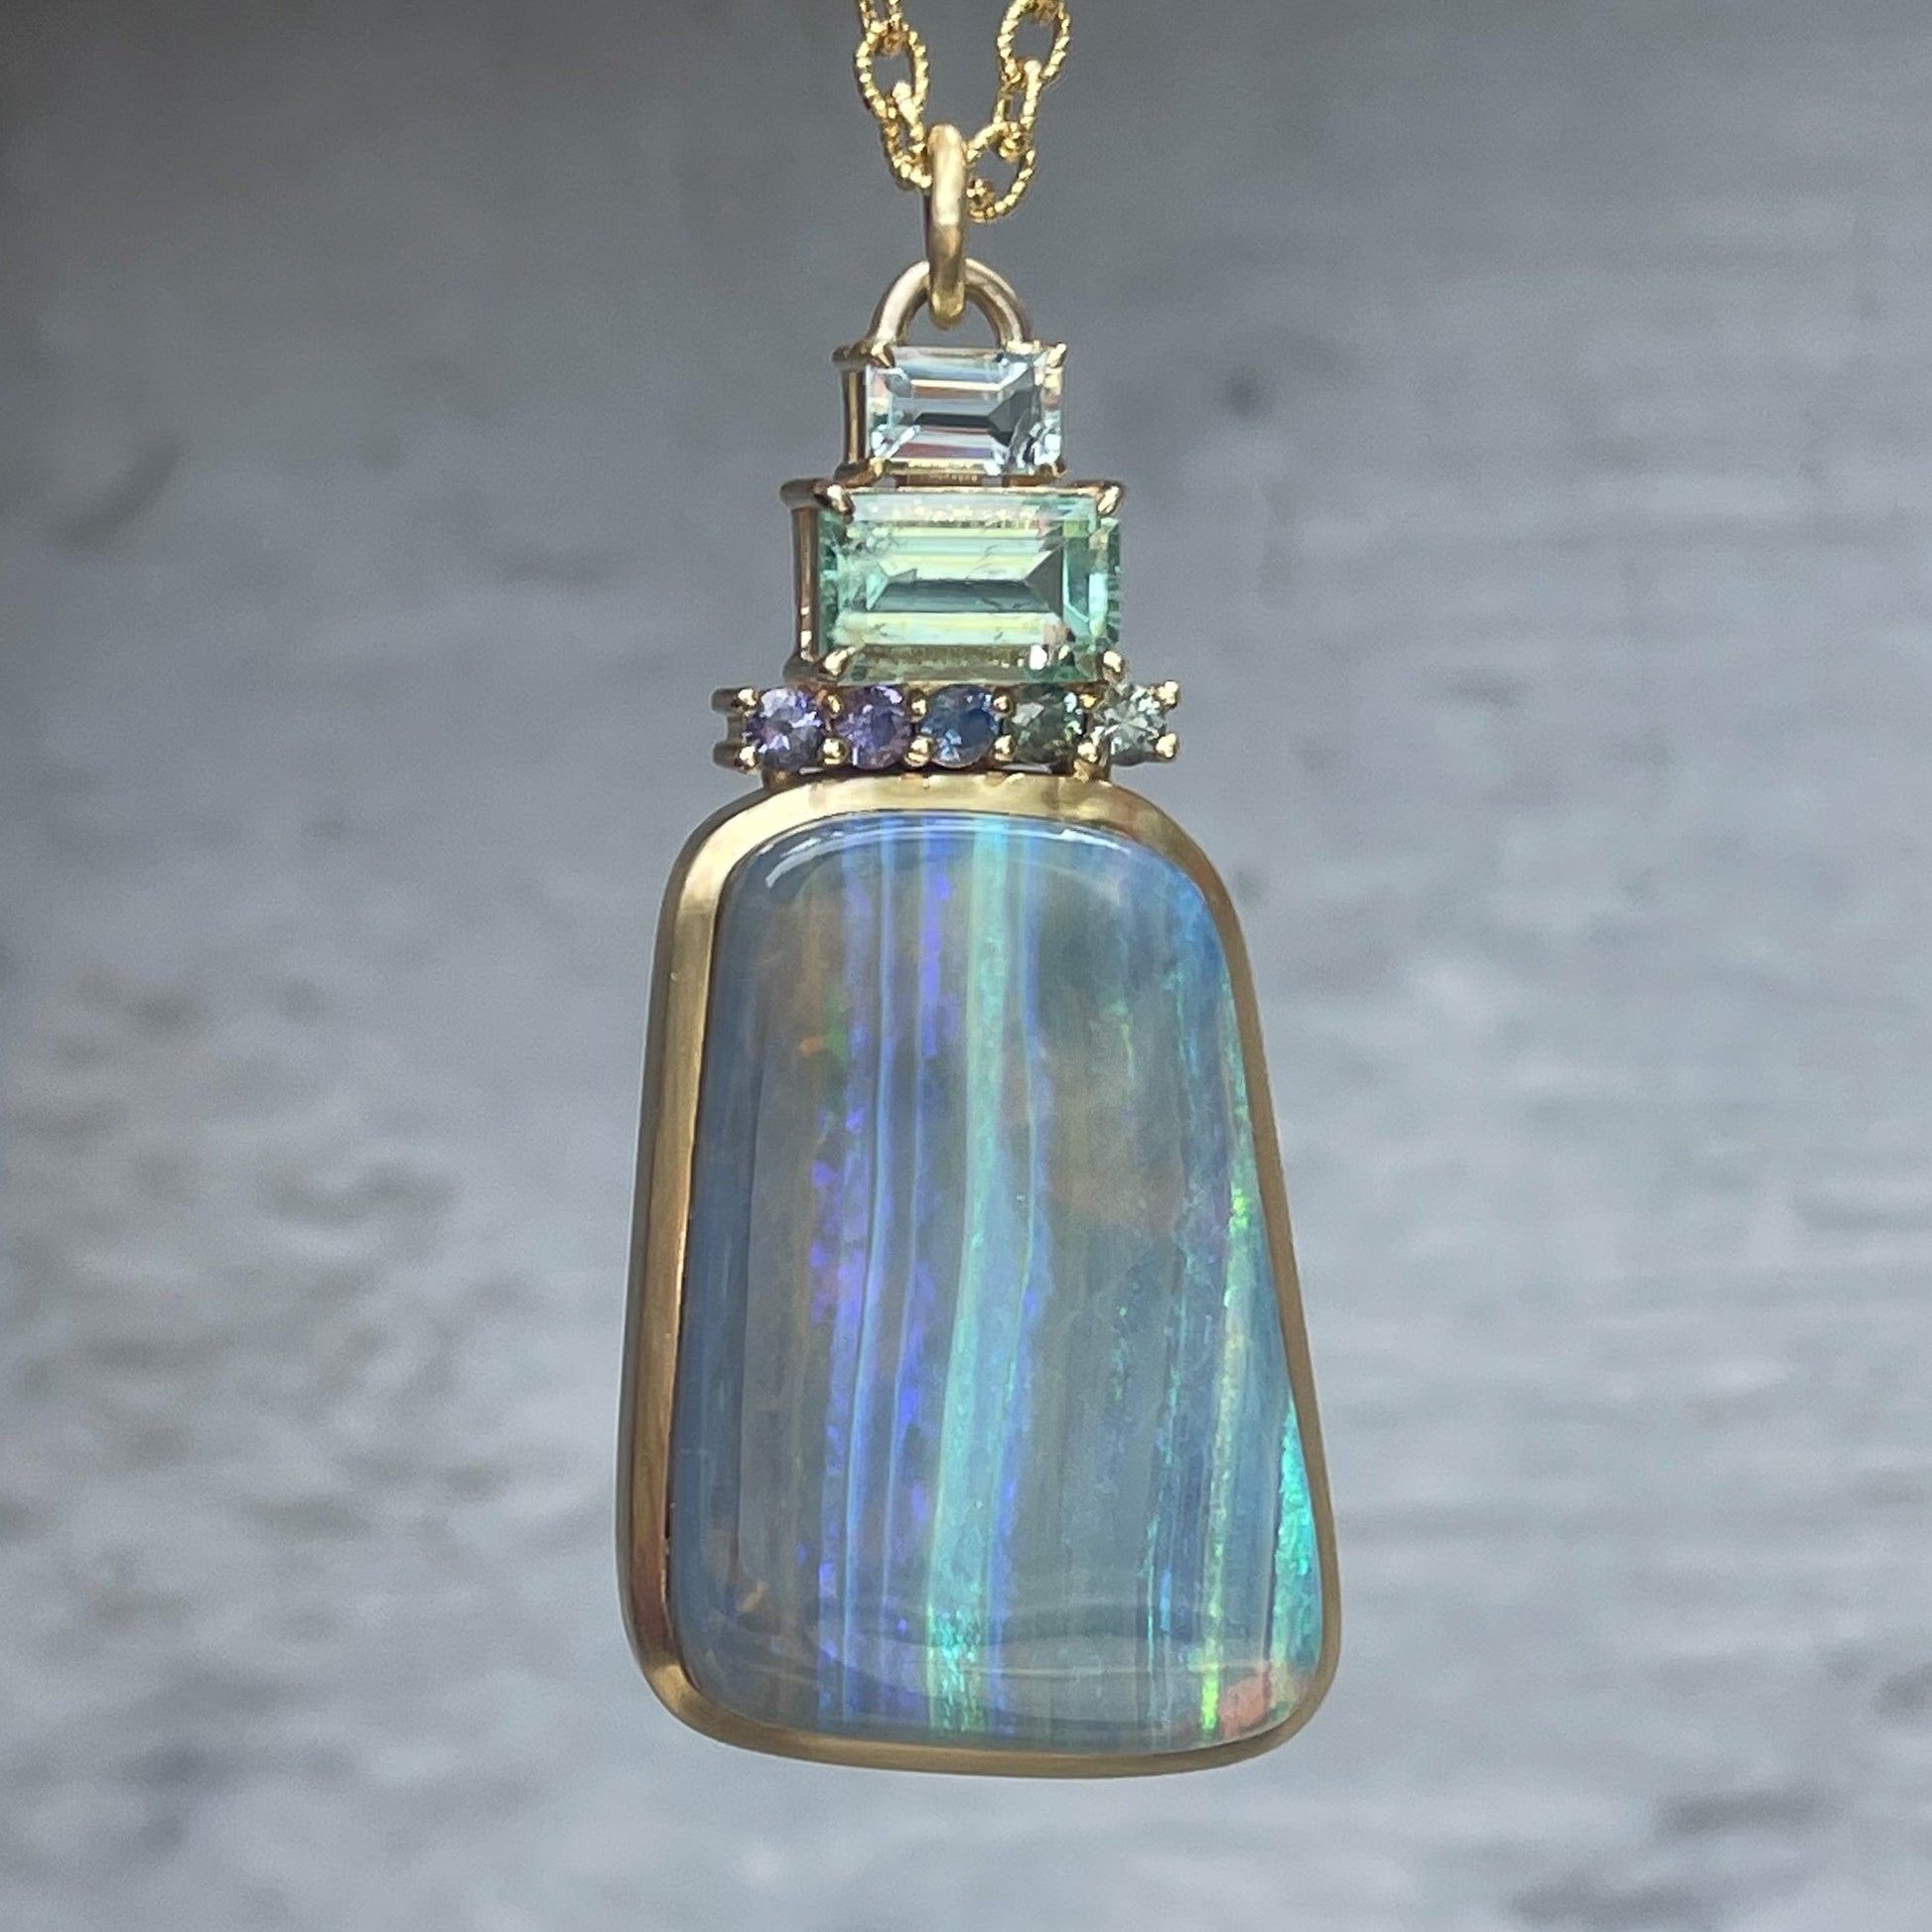 An Australian Opal Necklace by NIXIN Jewelry hangs in front of a grey wall. Atop the Blue Opal stack ombré sapphires, an emerald, and an aquamarine.